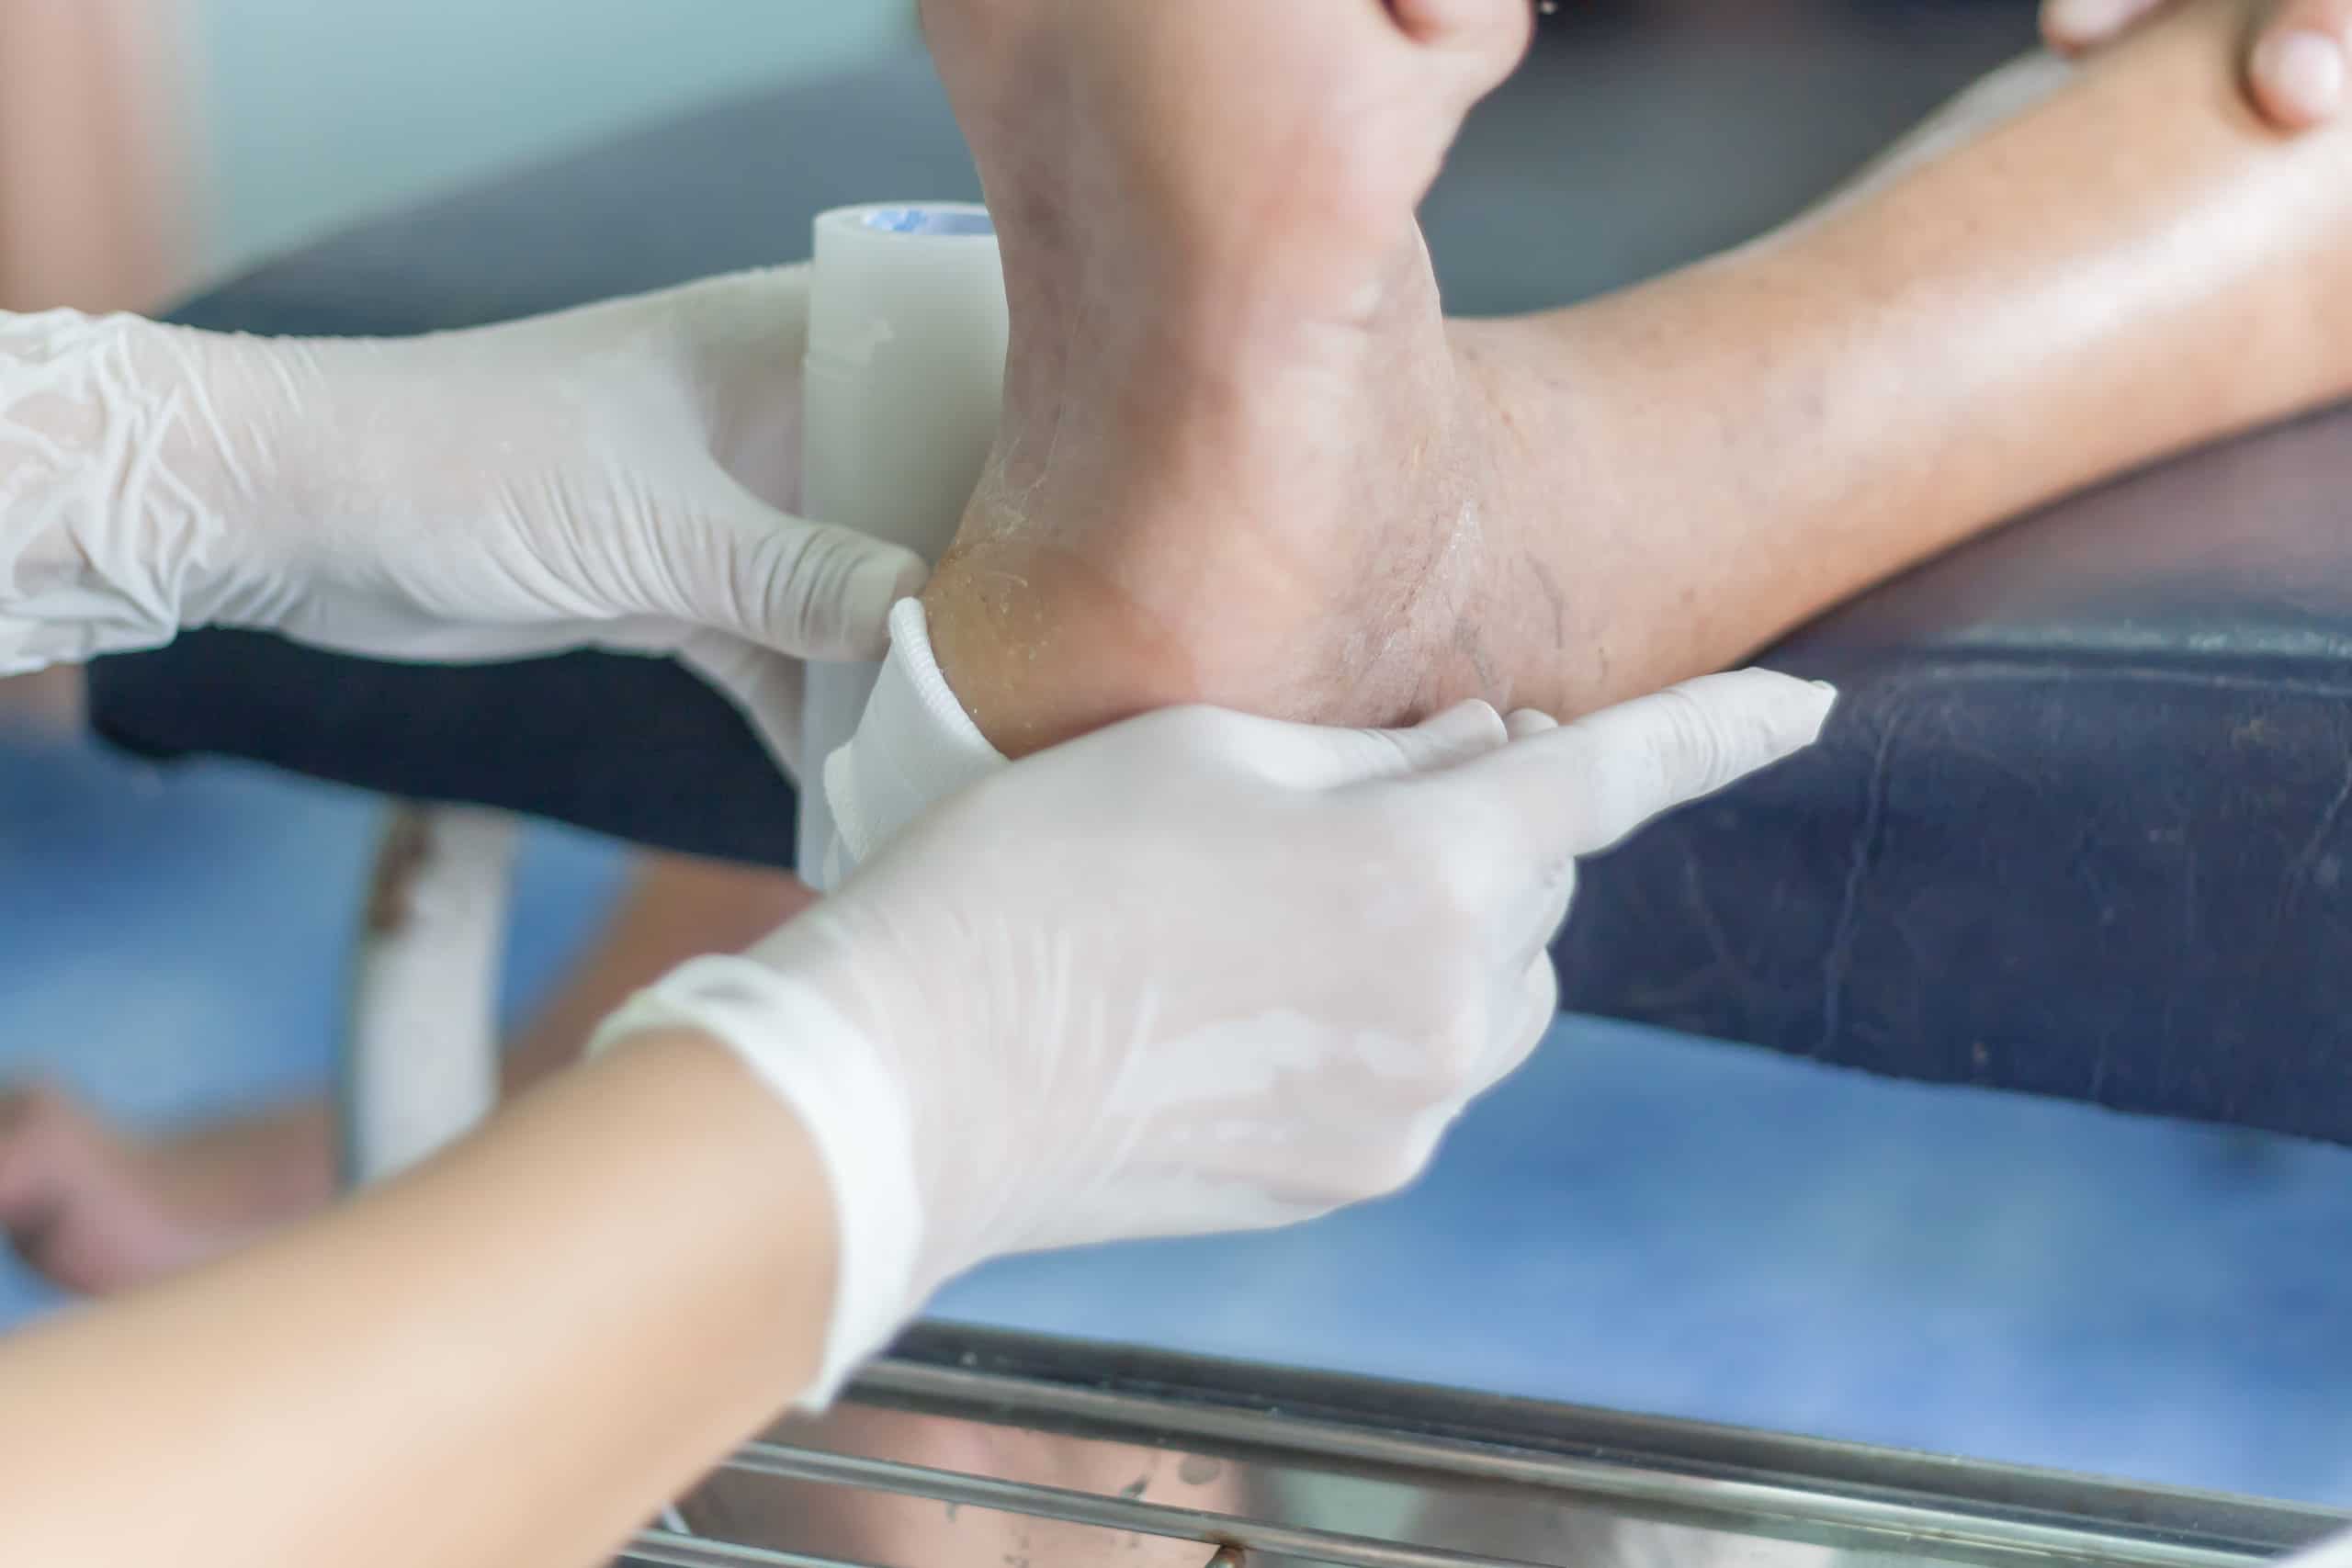 Treating infected wound of diabetic foot